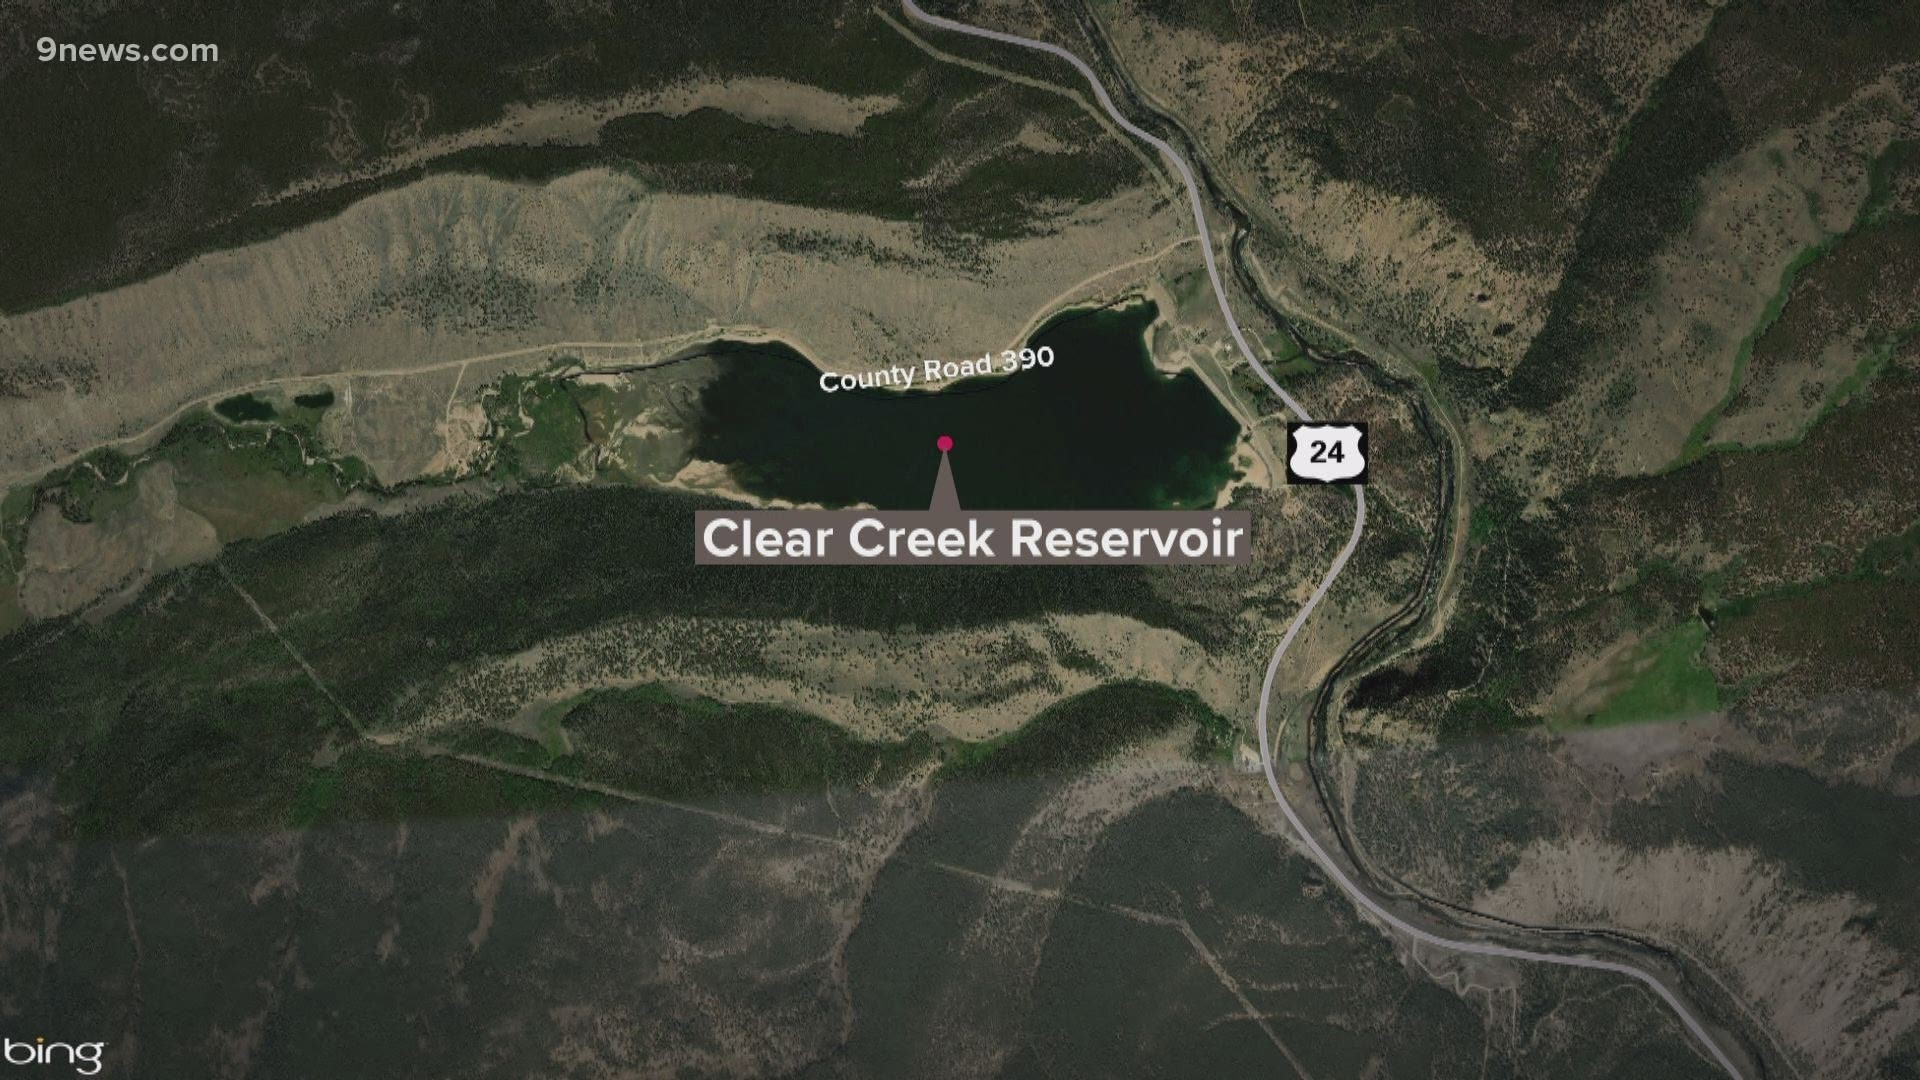 Two teens fell into the water Saturday. One was rescued and the other was still missing, according to Colorado Parks and Wildlife.